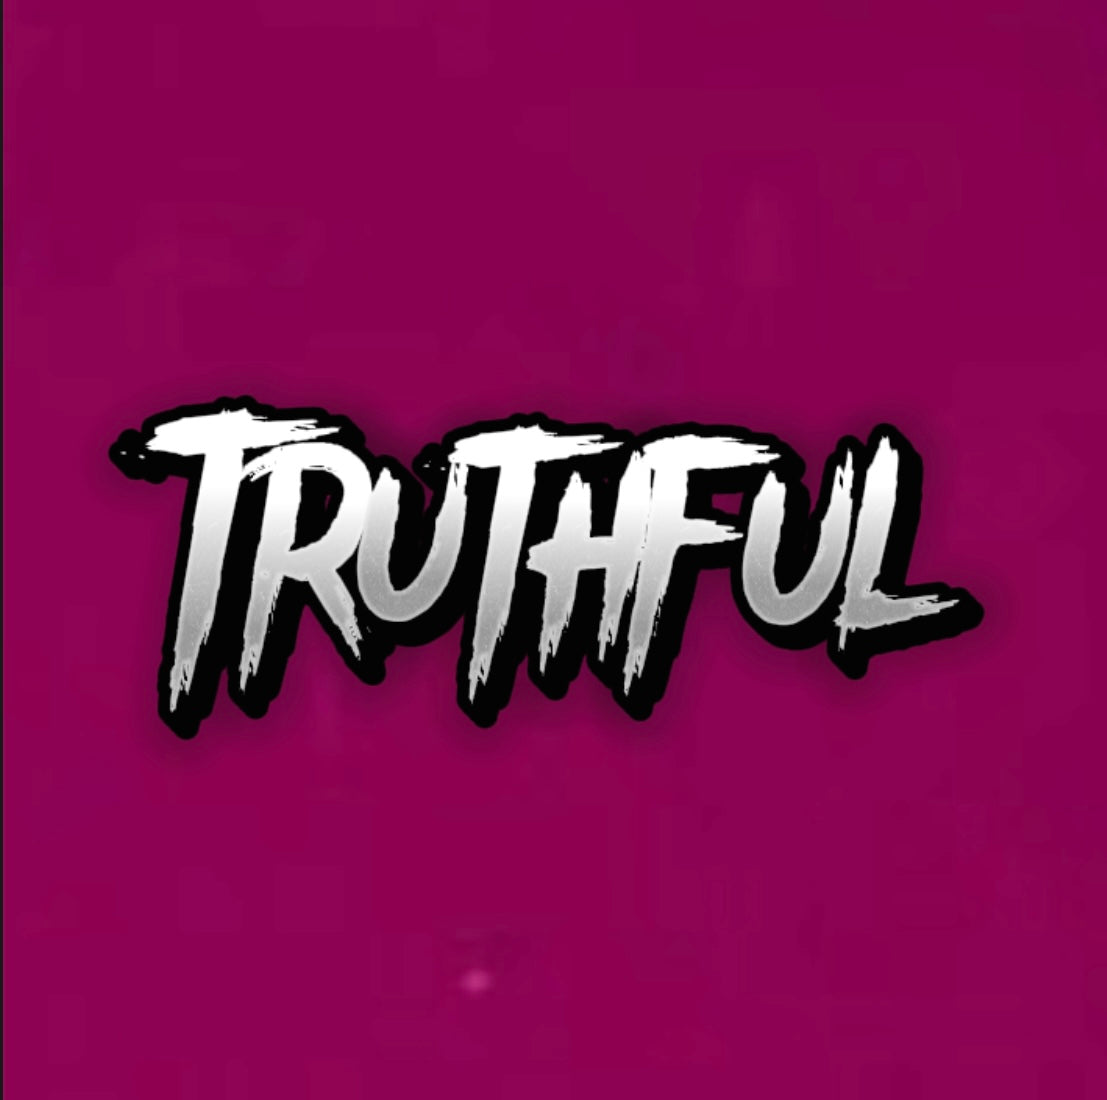 "Truthful" Hydro Liner